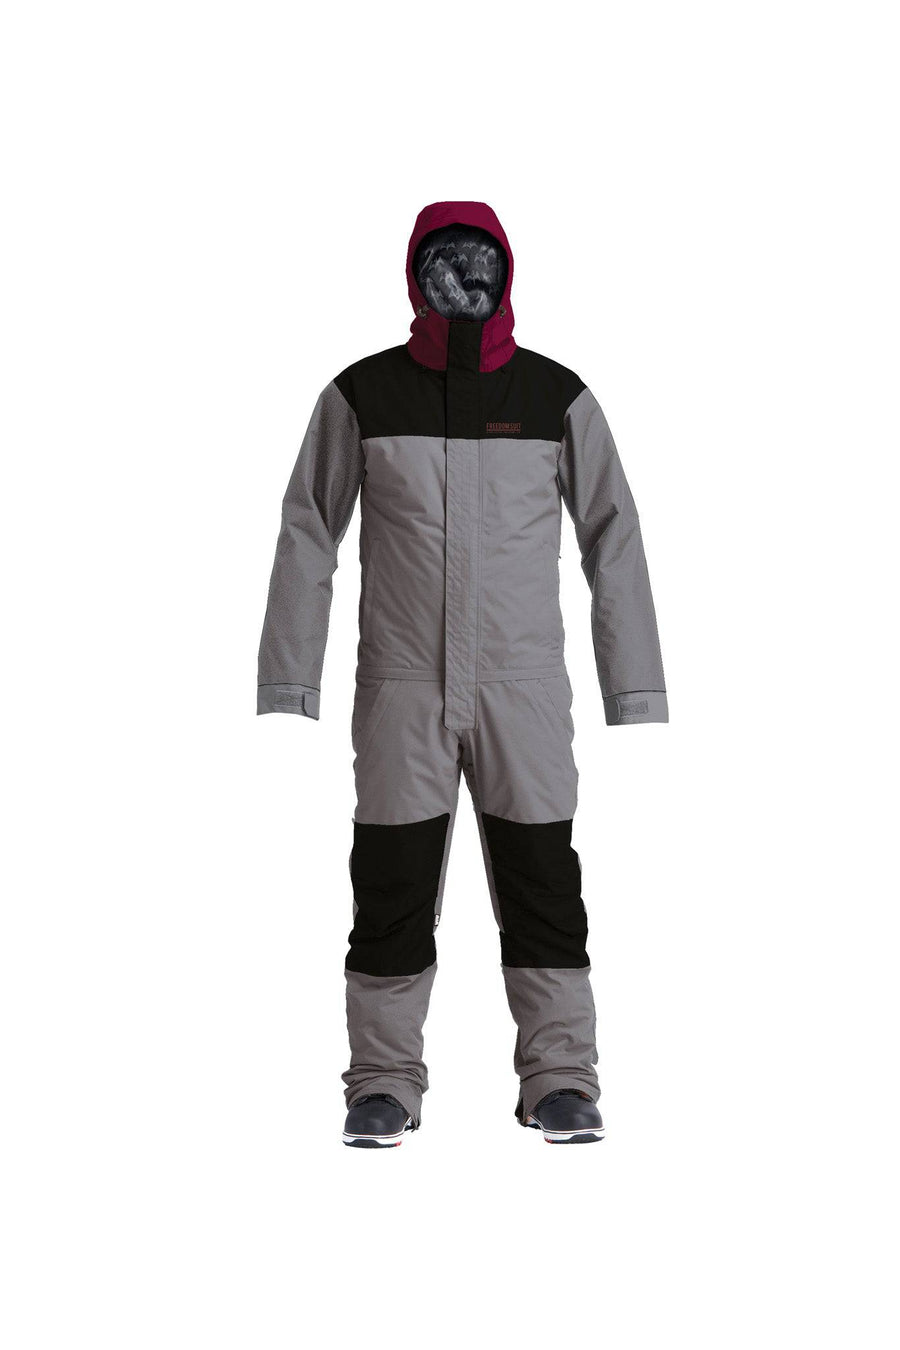 Airblaster Insulated Freedom Suit in Shark 2023